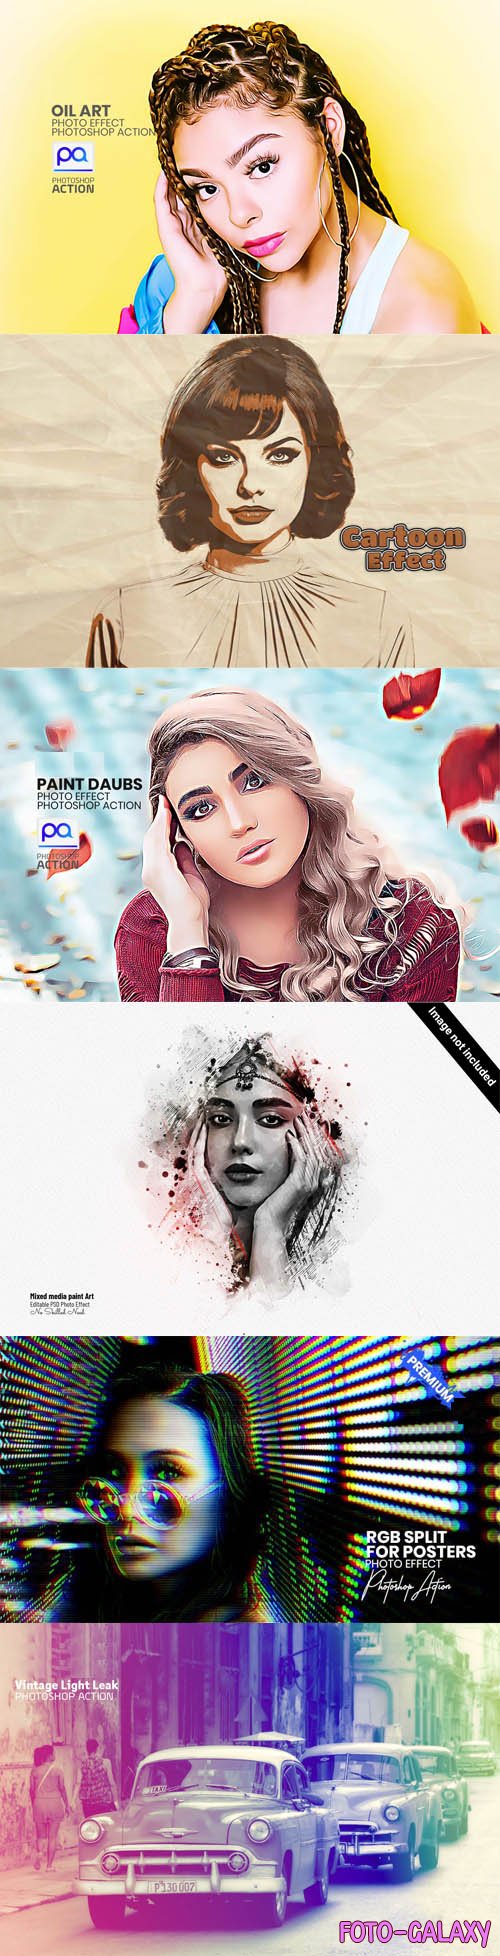 10 Best Photo Effects & Actions for Photoshop [Vol.1]